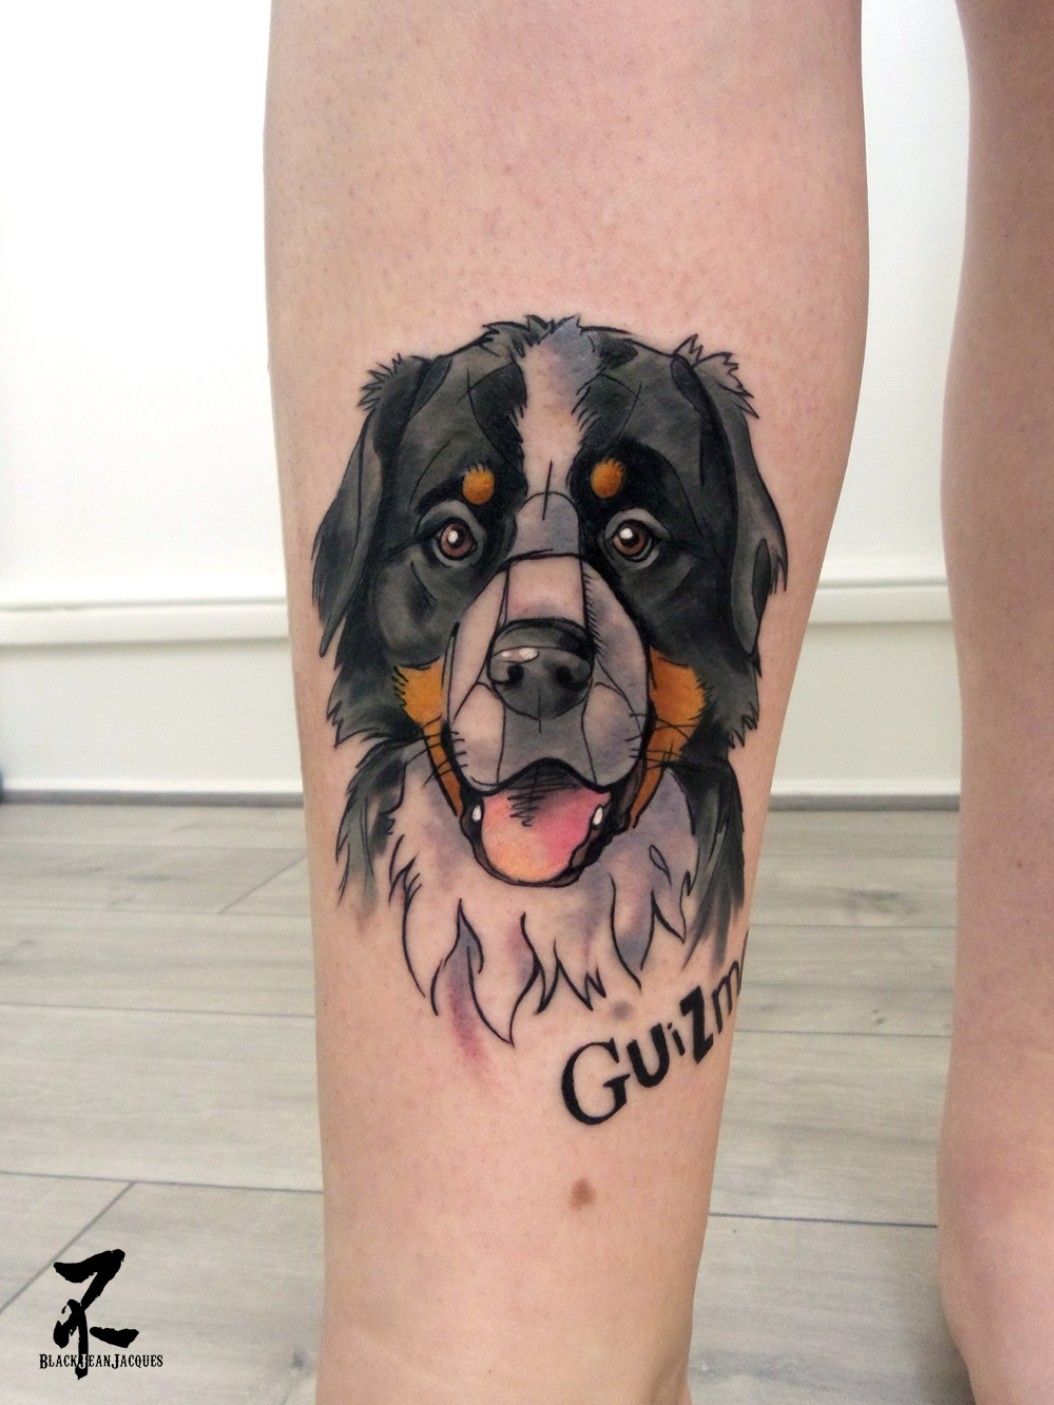 14 Amazing Tattoo Ideas For Bernese Mountain Dog Lovers  Page 2 of 3   PetPress  Tattoos for dog lovers Bernese mountain dog Dog lovers